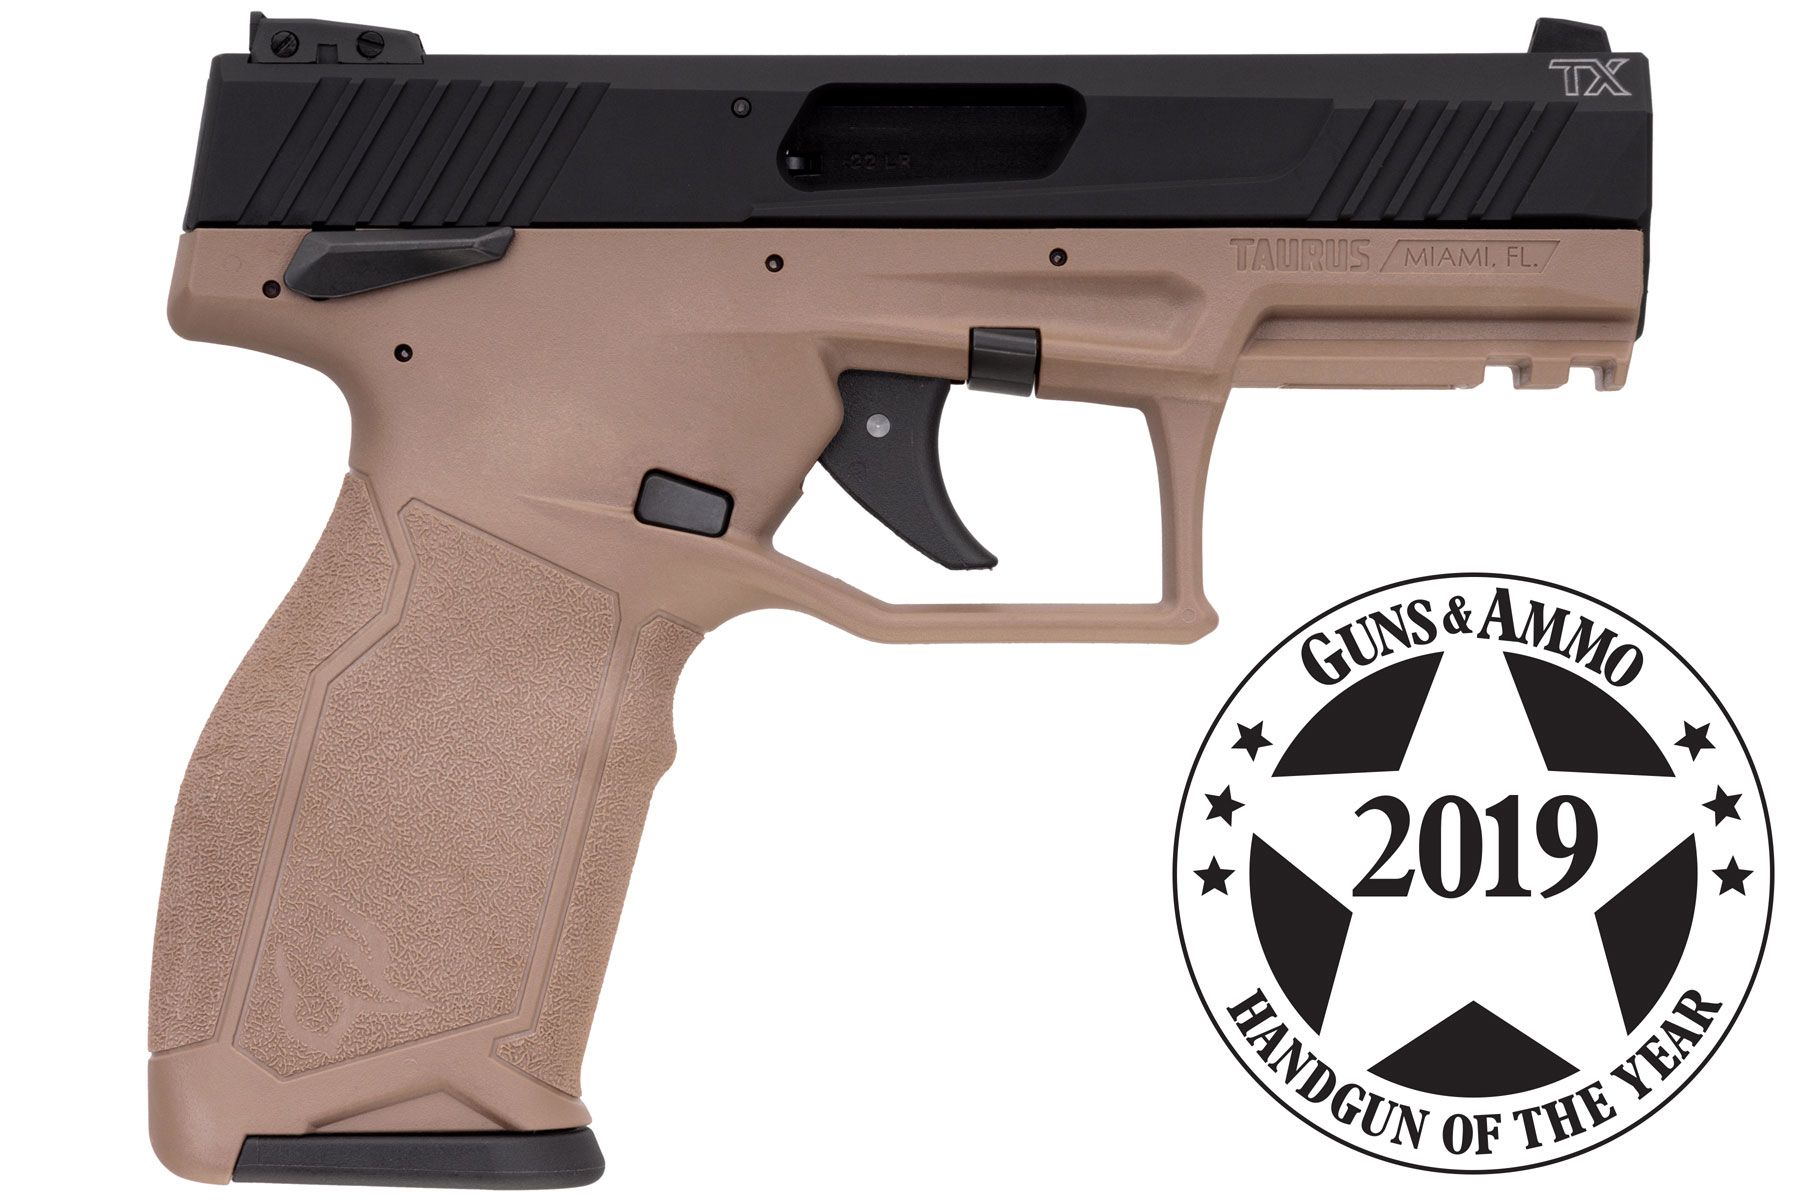 Hard Anodized Black 22 LR FDE Polymer Frame 16-Round With Manual Safety